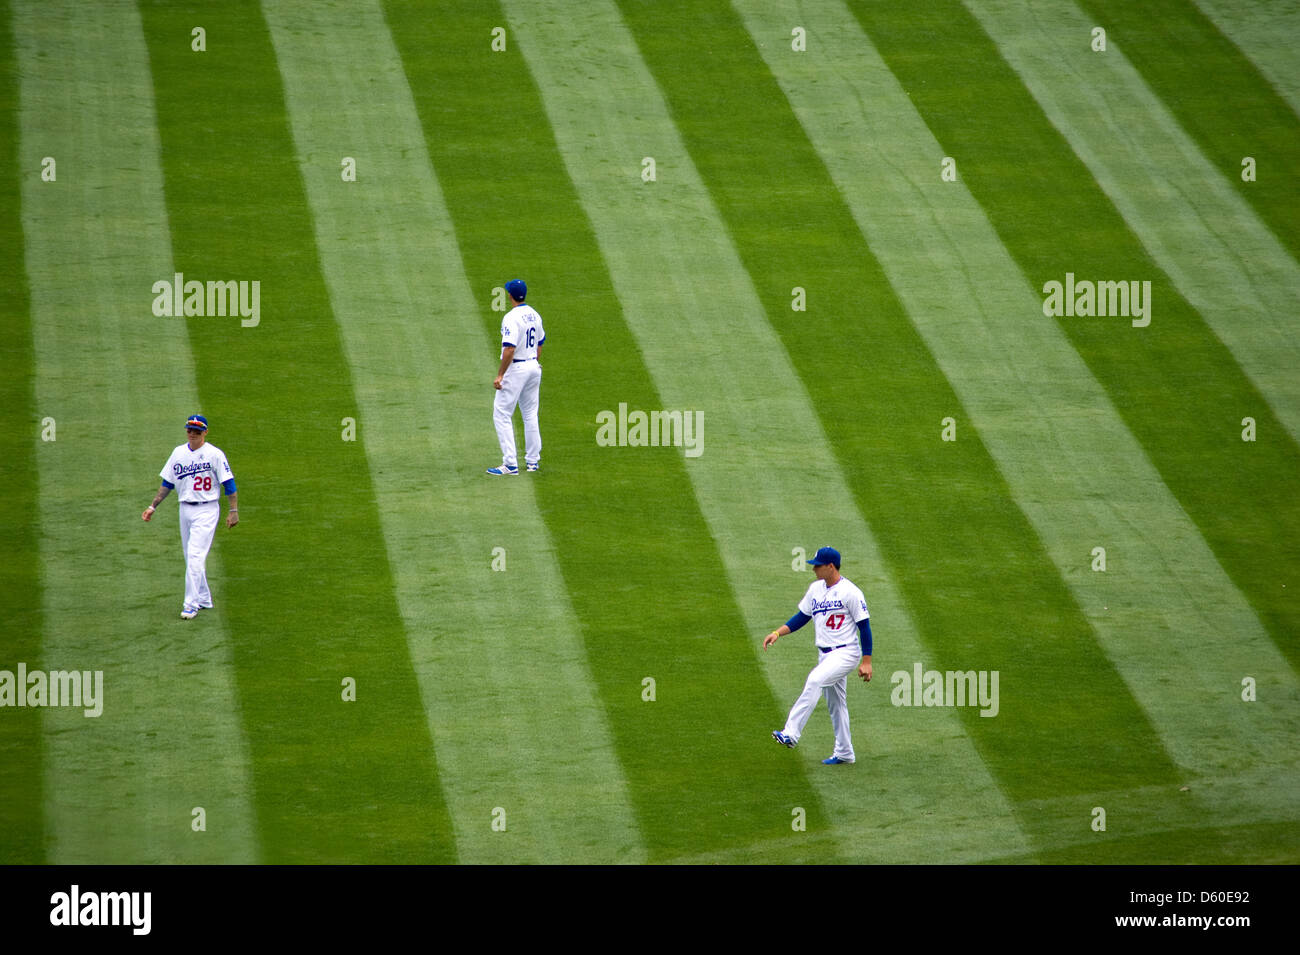 Los Angeles Dodgers players stretch in the outfield as part of pre-game conditioning. Stock Photo